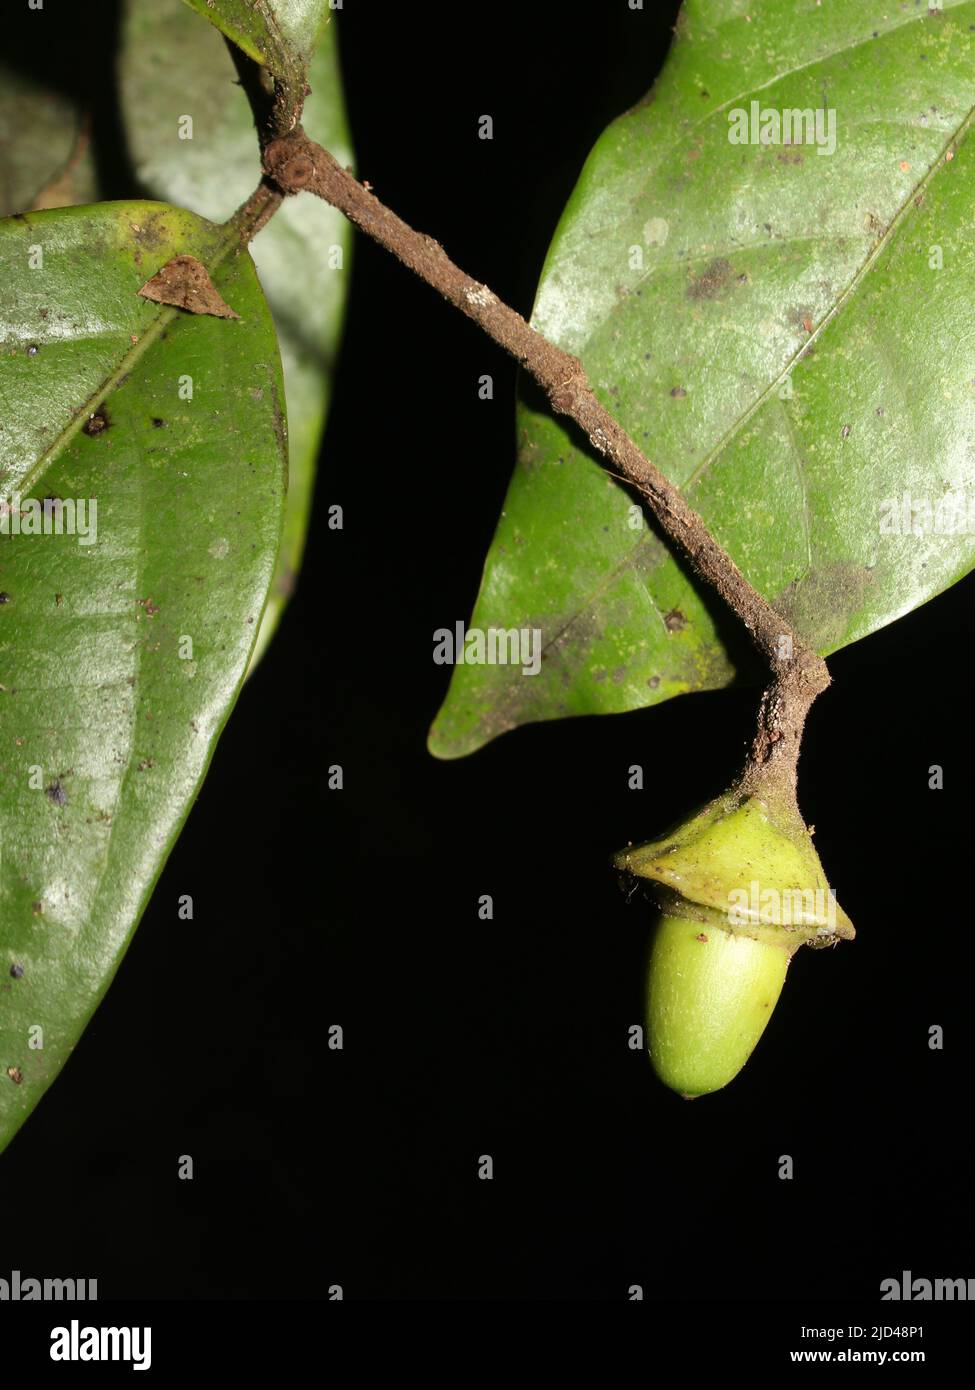 Leaves and fruit of Mespilodaphne paradoxa, endemic to Costa Rica Stock Photo